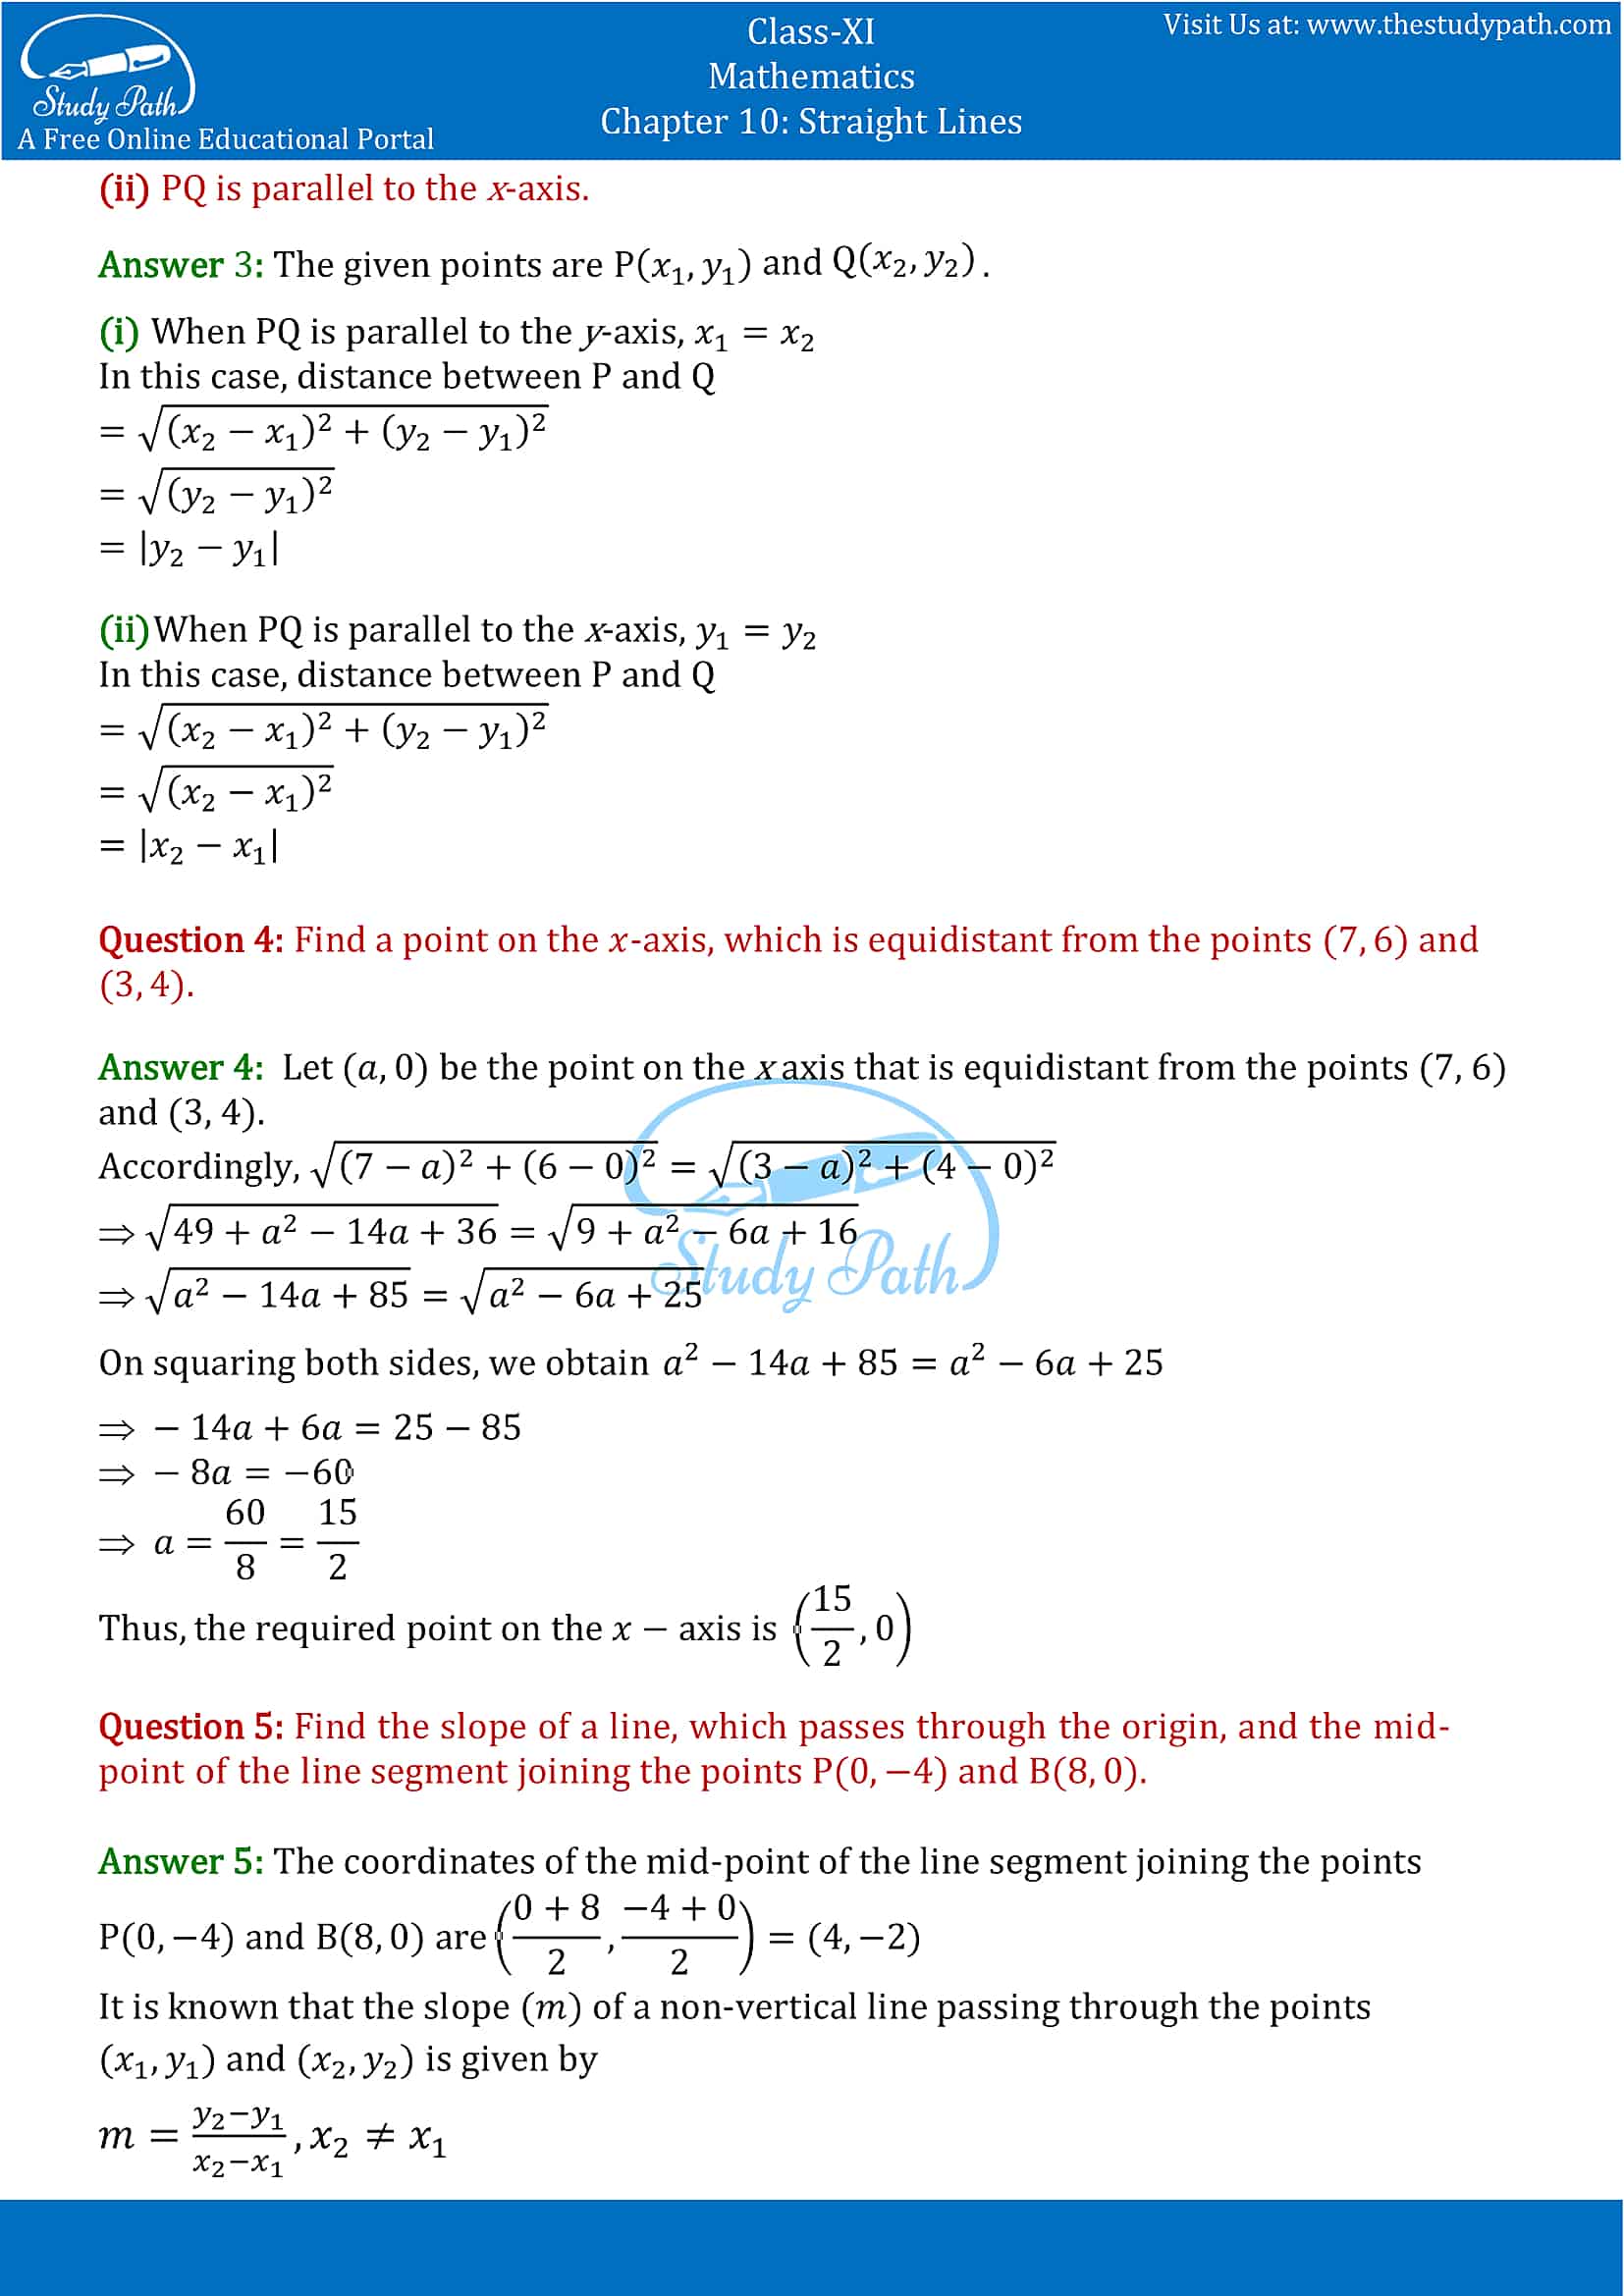 NCERT Solutions for Class 11 Maths chapter 10 Straight Lines Exercise 10.1 Part-3